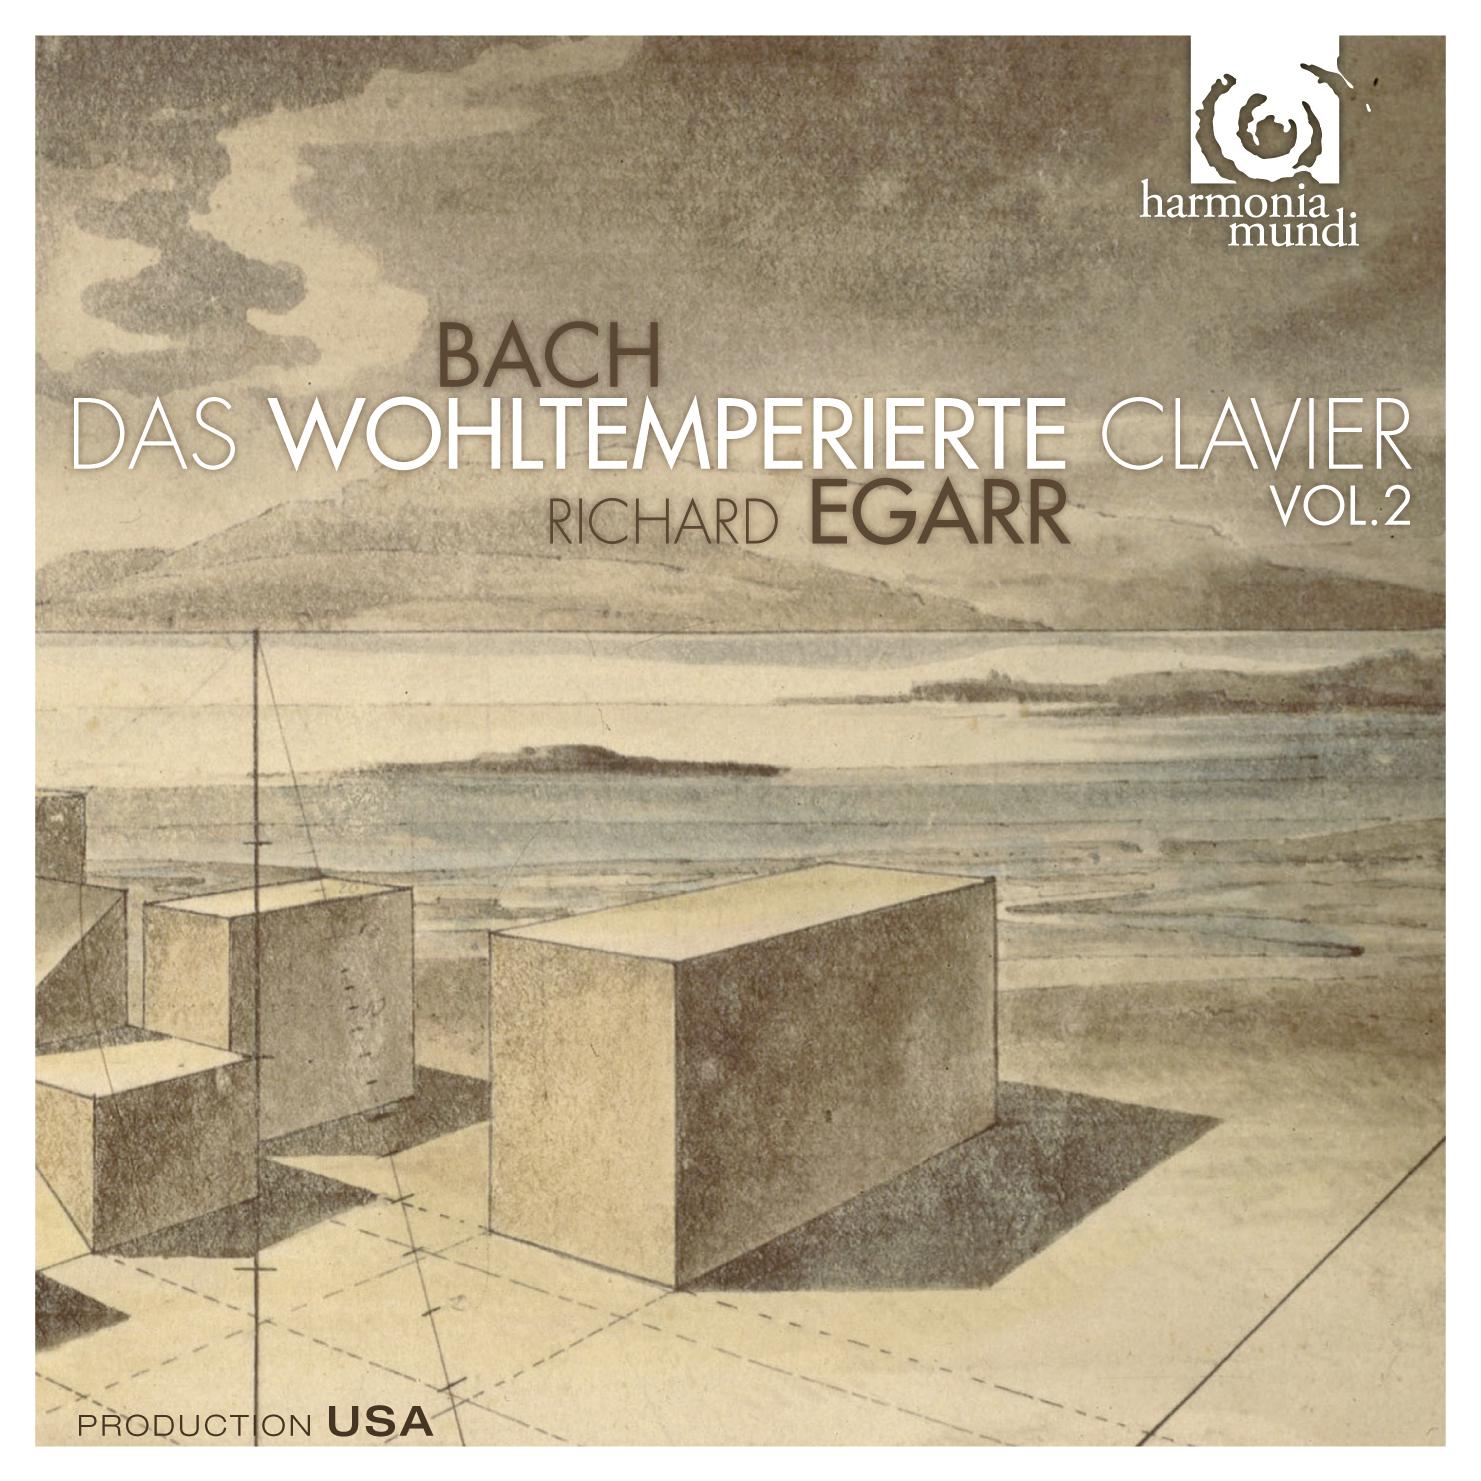 Well-Tempered Clavier, Book II, BWV 870-893: Fugue VI in D Minor, BWV 875